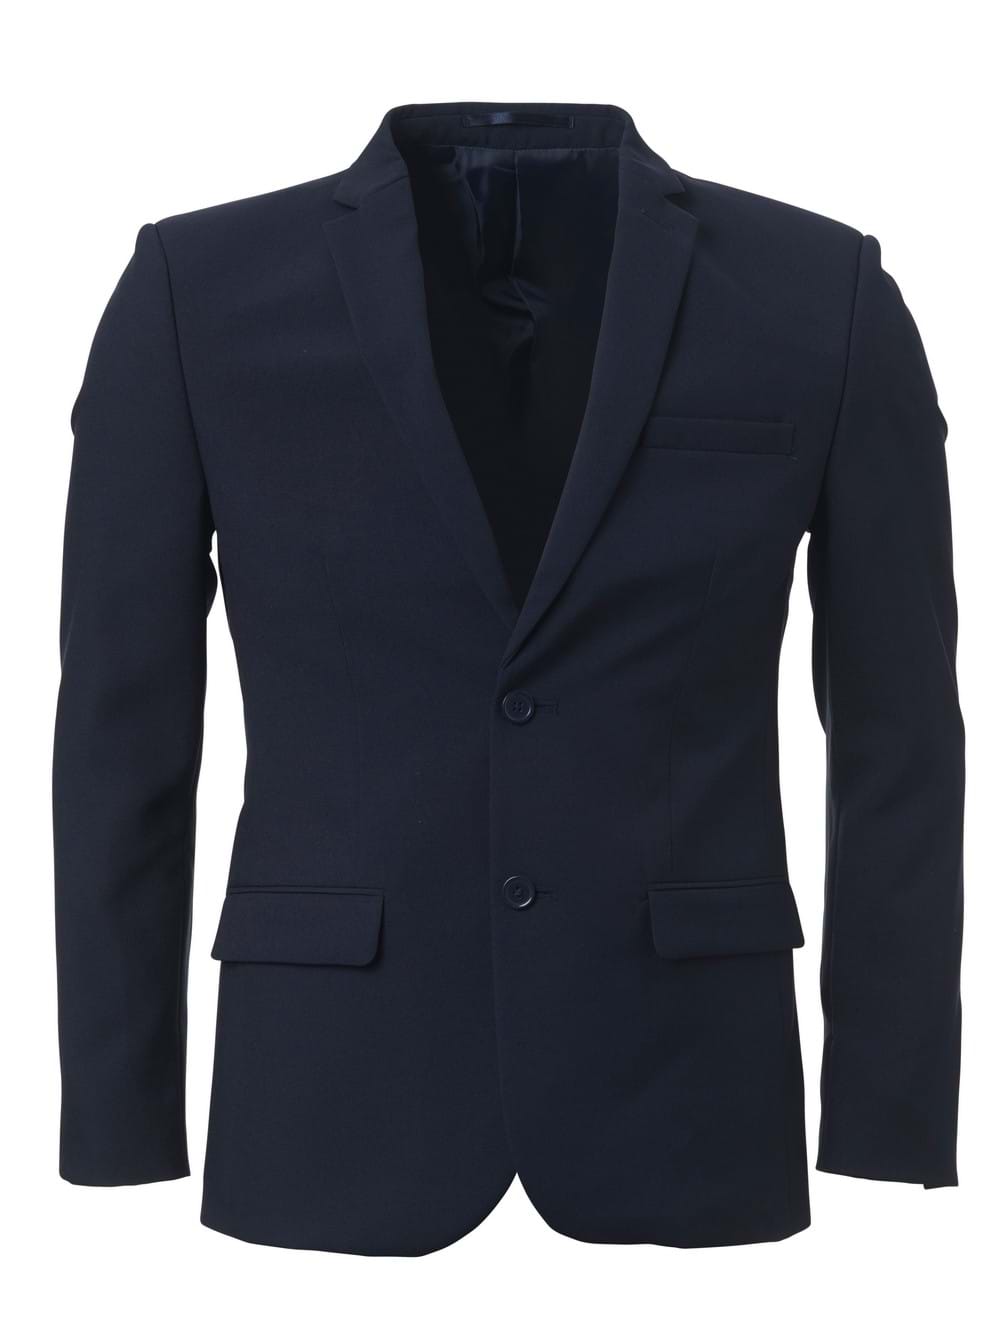 Men's Marco Fashion Fit Jacket- Fabric 896 Navy